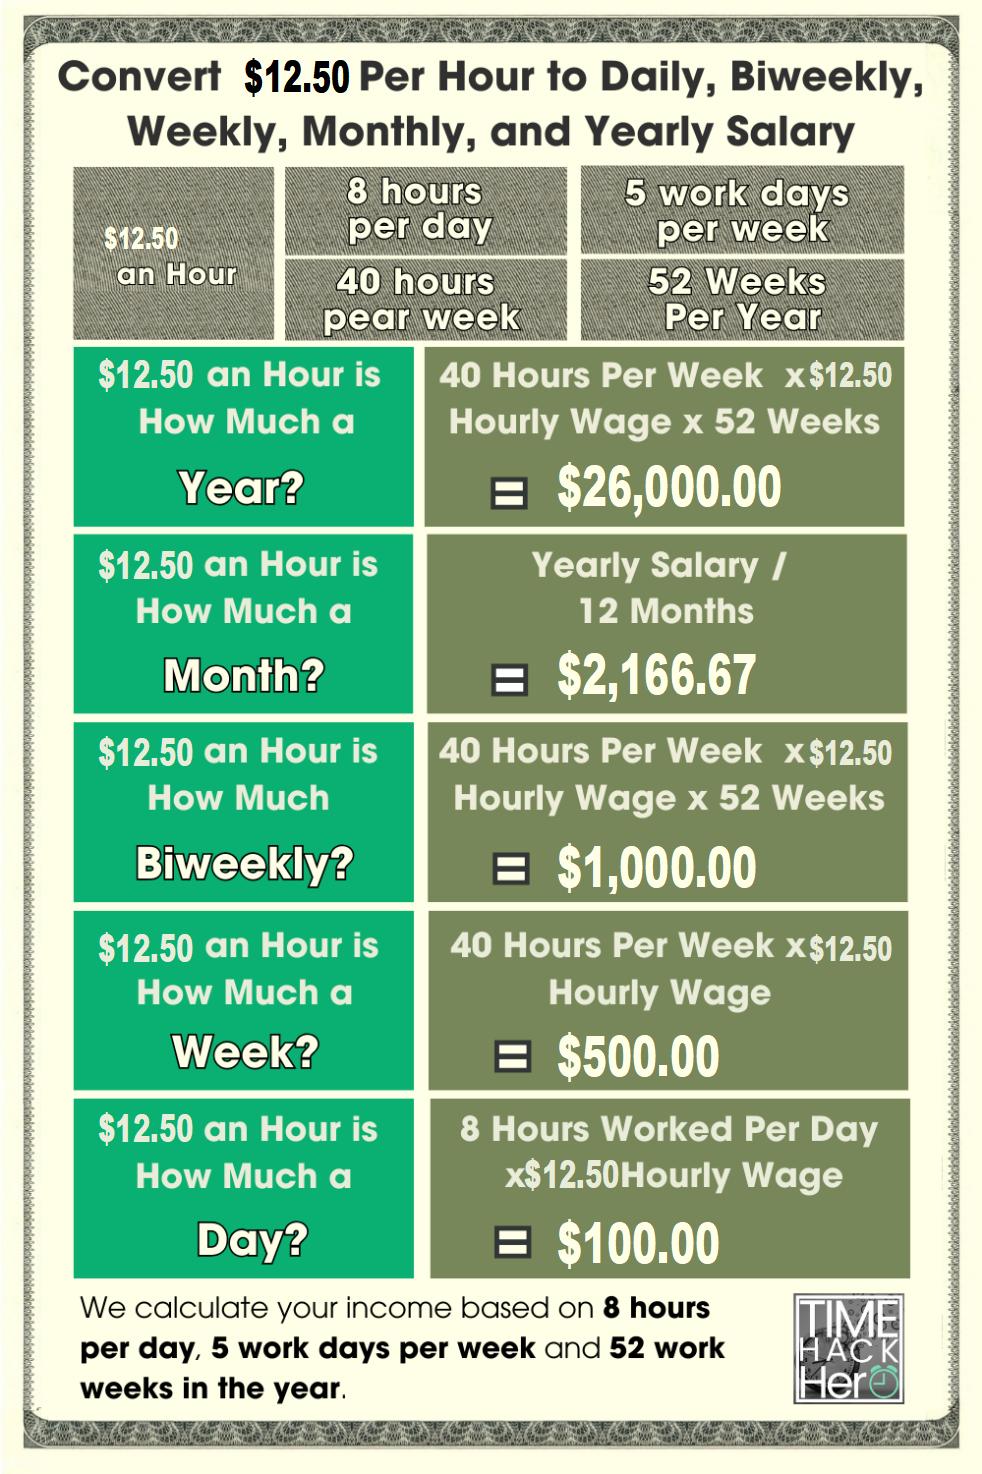 Convert $12.50 Per Hour to Weekly, Monthly, and Yearly Salary